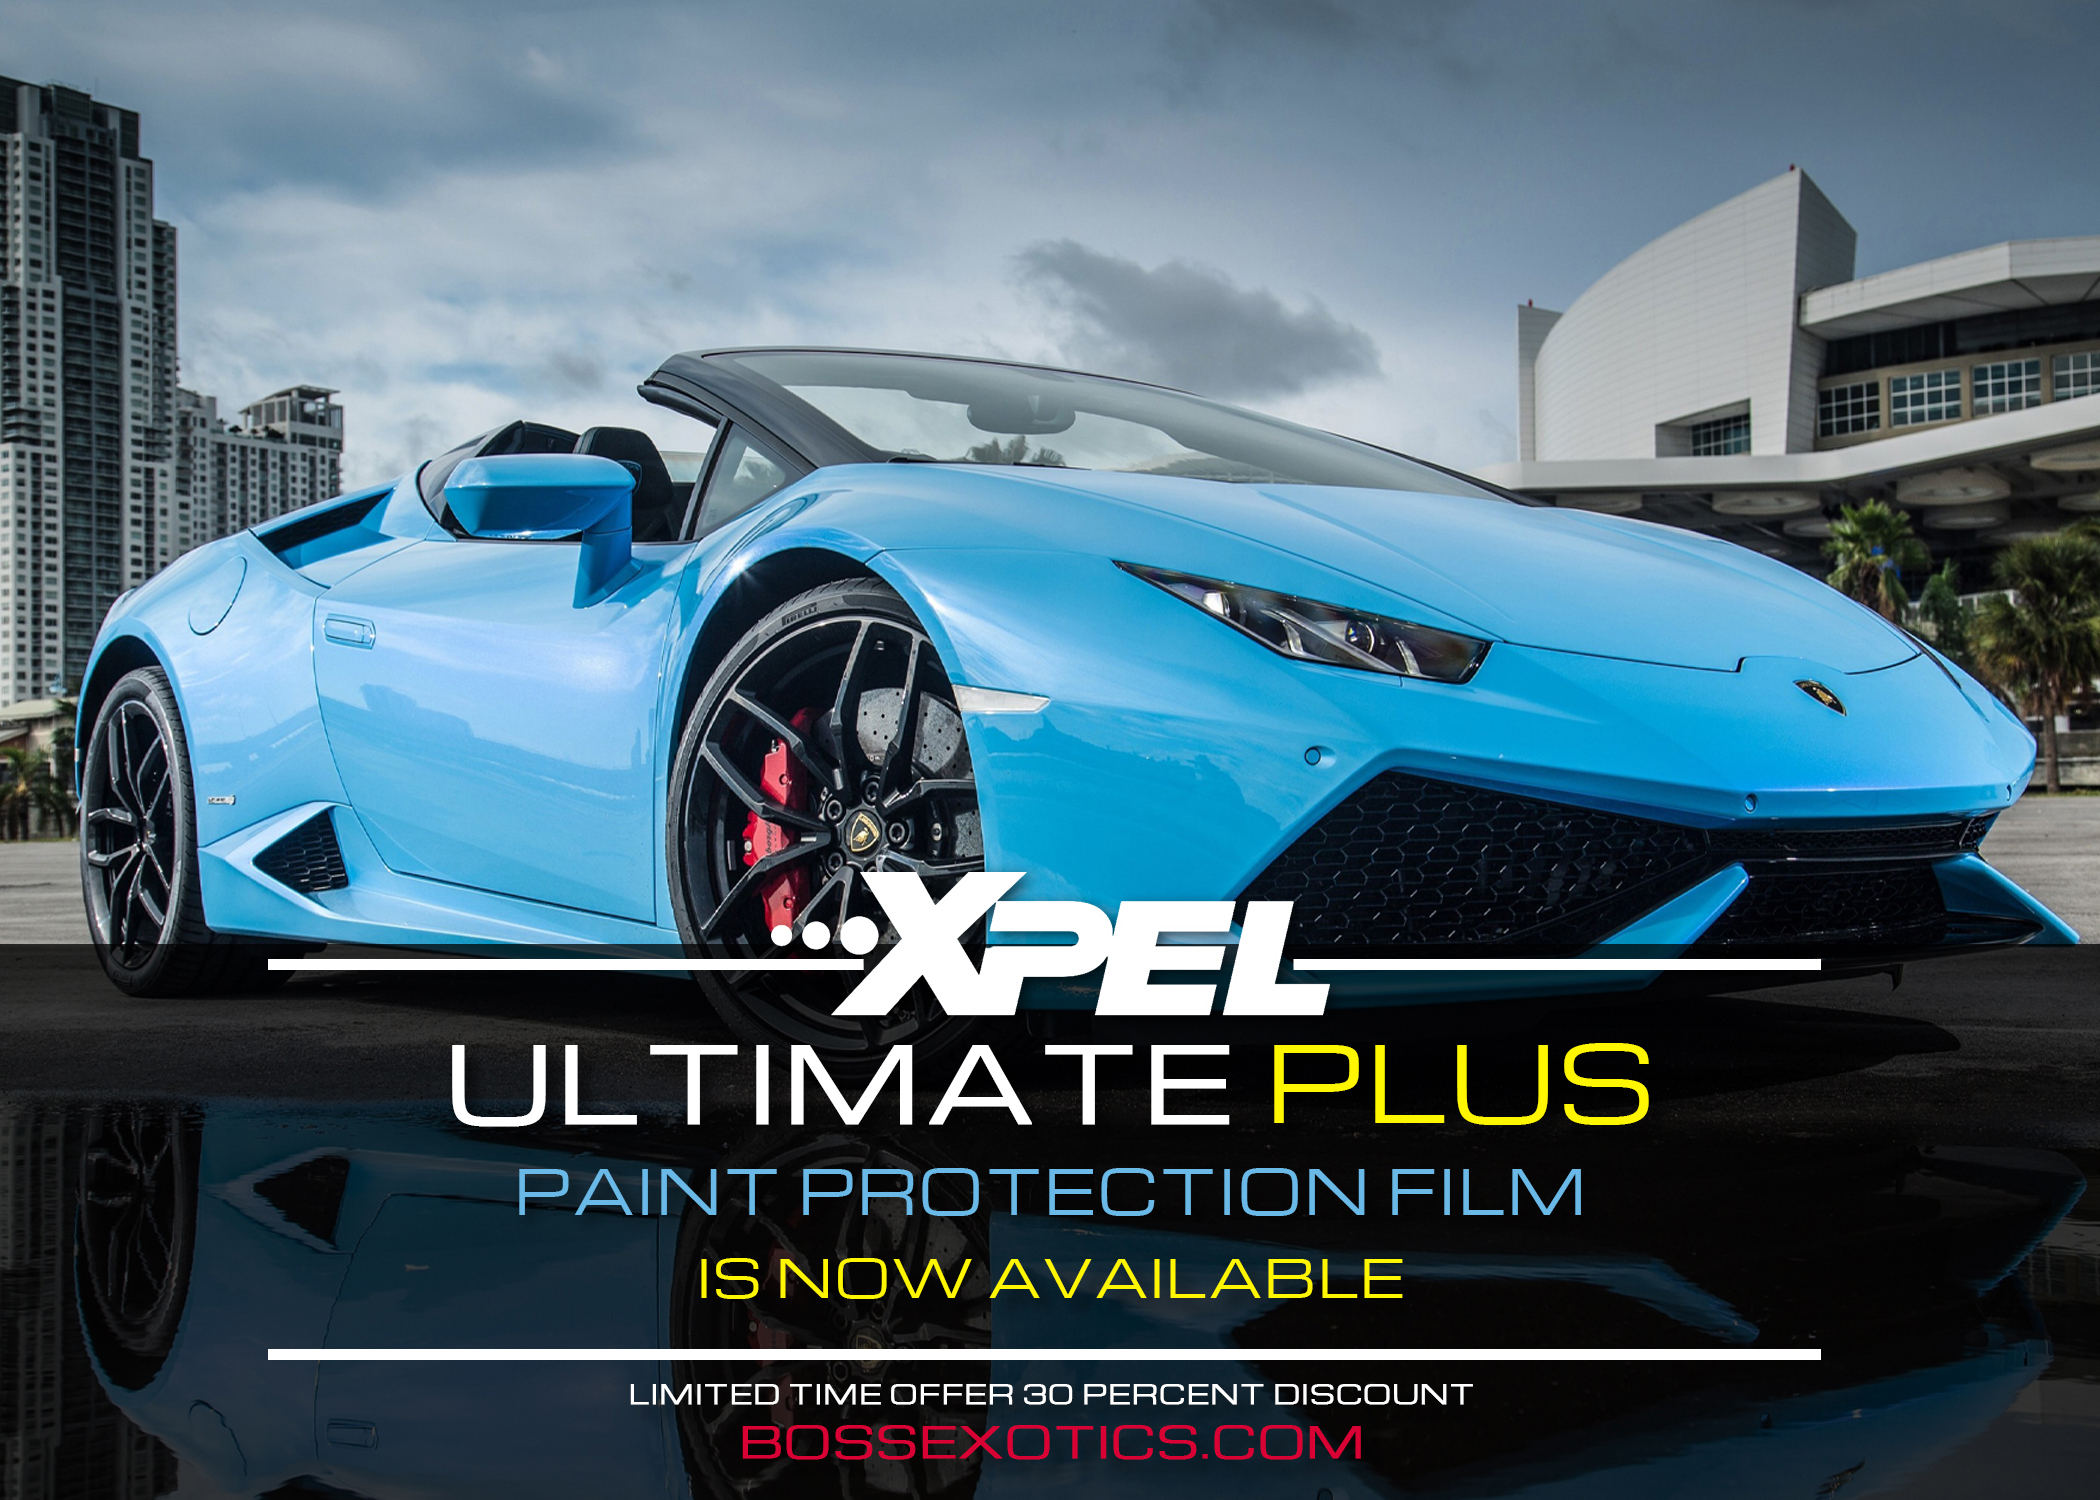 All You Need to Know About XPEL Paint Protection Film